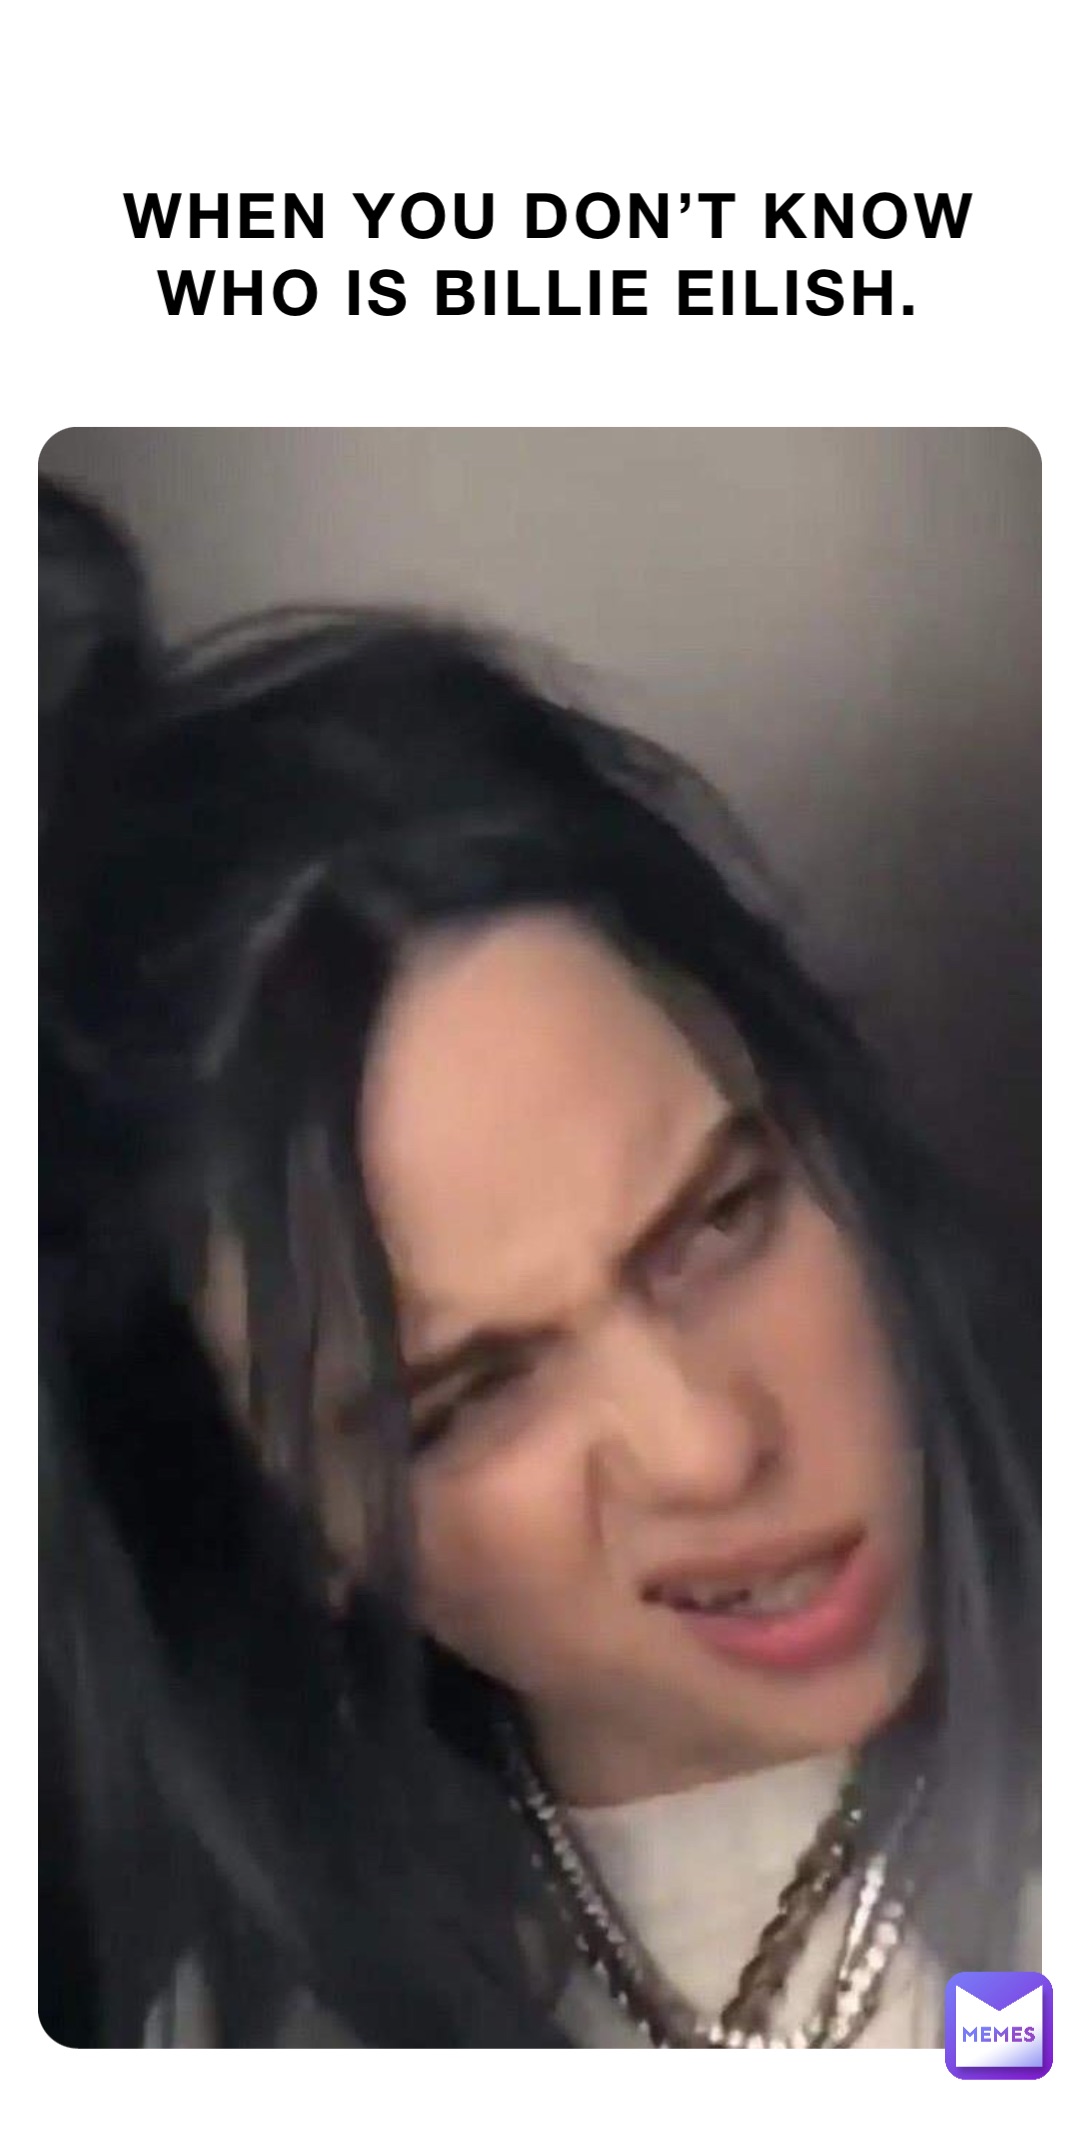 When you don’t know who is Billie Eilish.